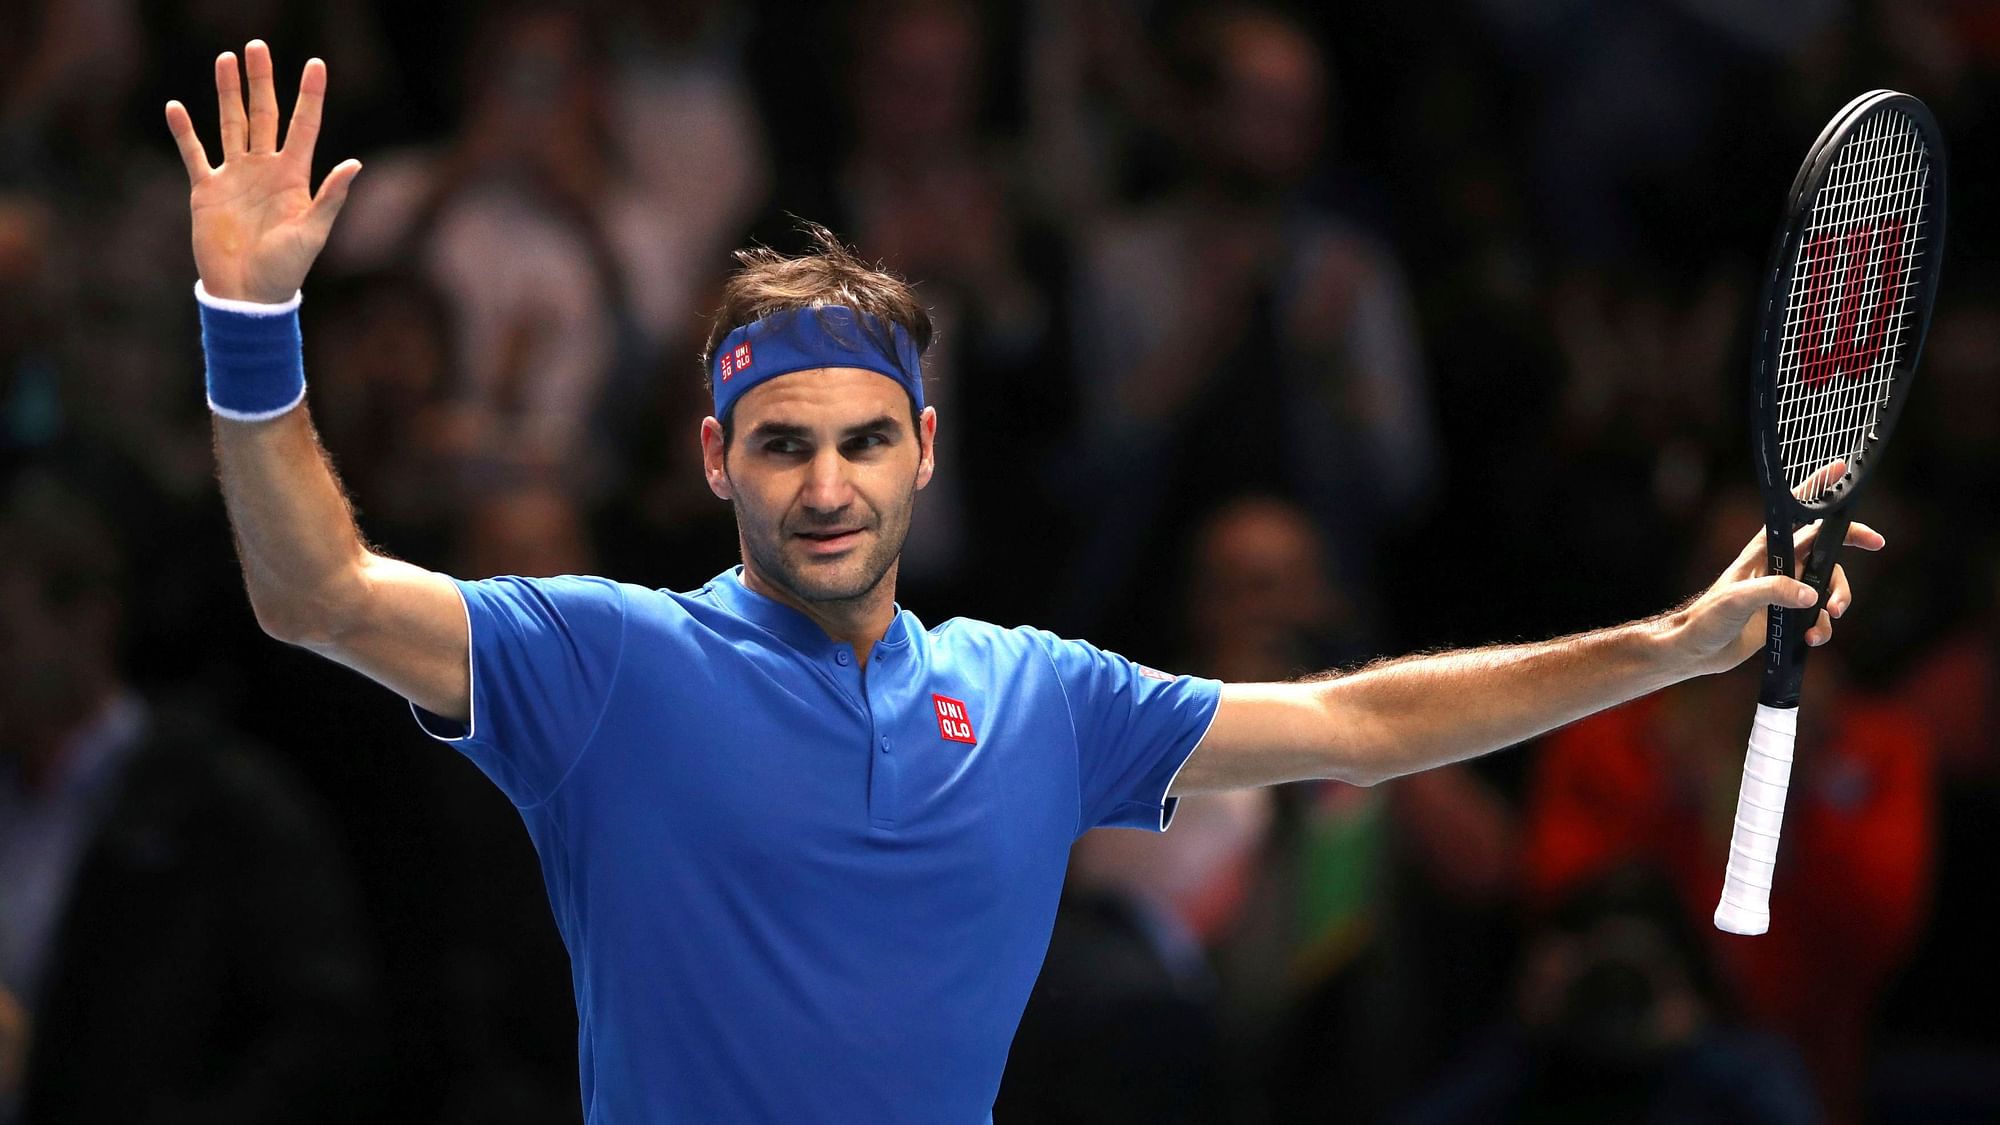 Roger Federer qualified for the last-4 at the ATP Finals for a record-extending 15th time